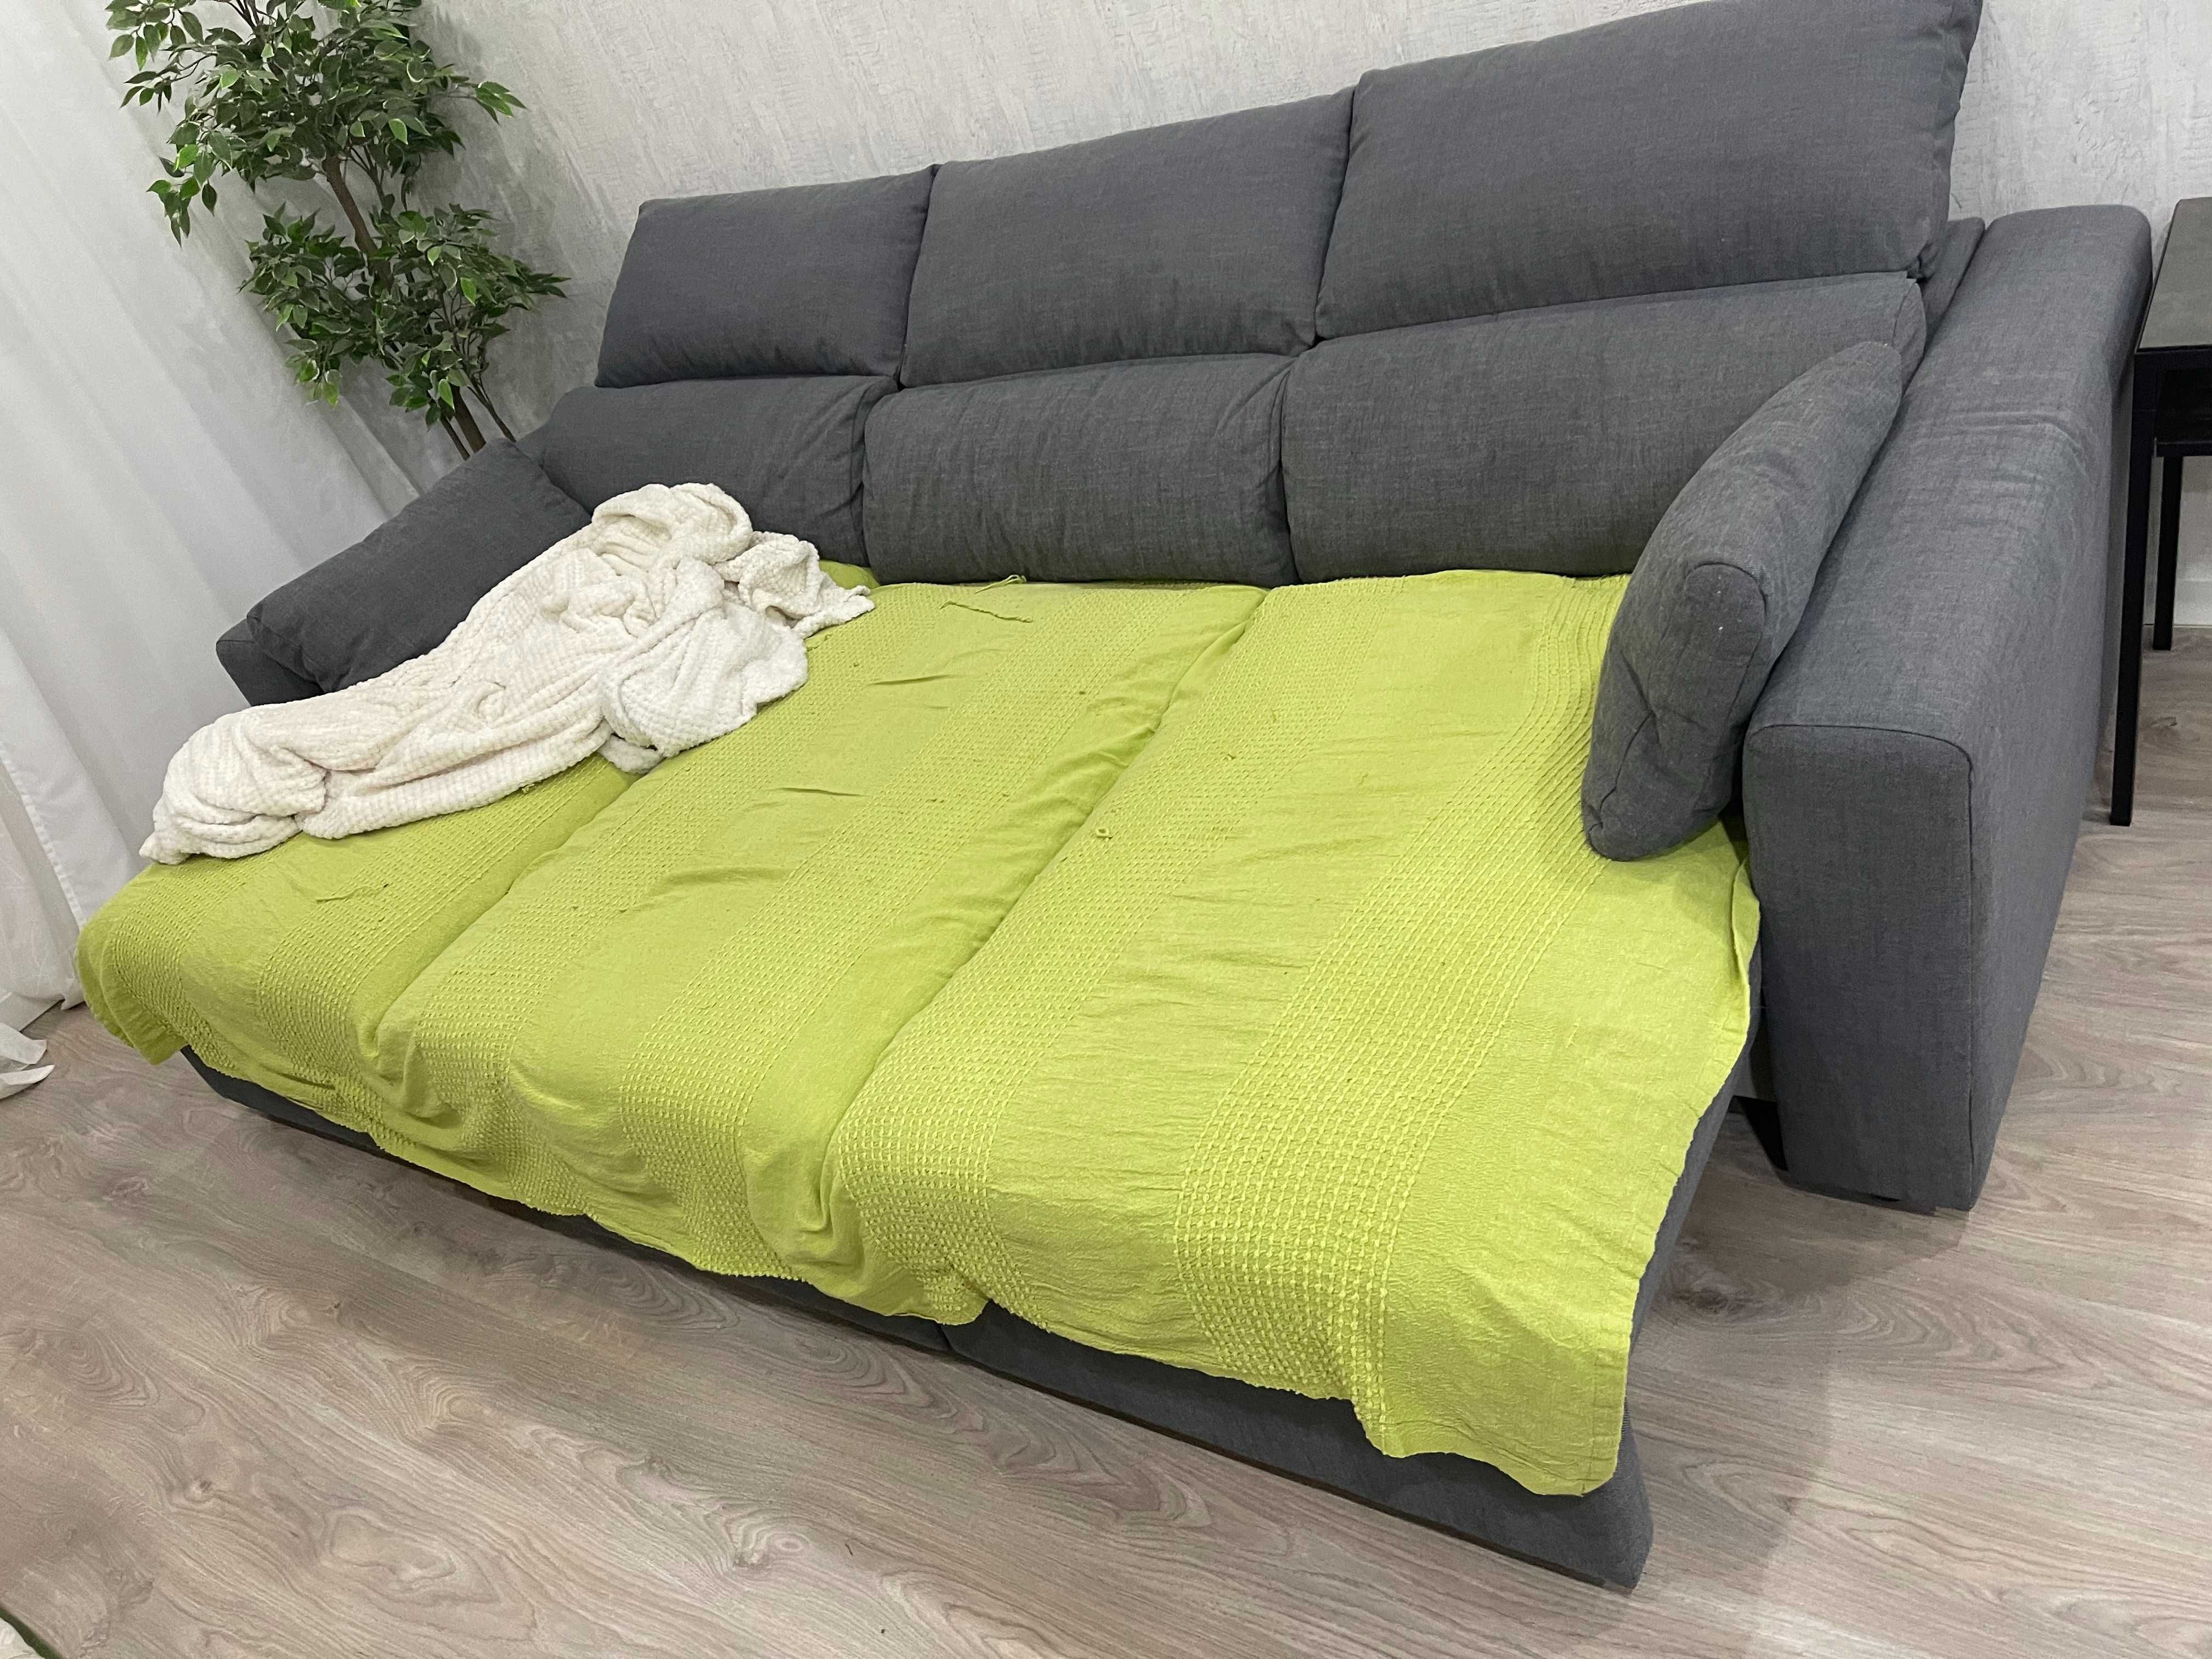 Sofá IKEA 3 lugares c/chaise longue, Hillared antracite